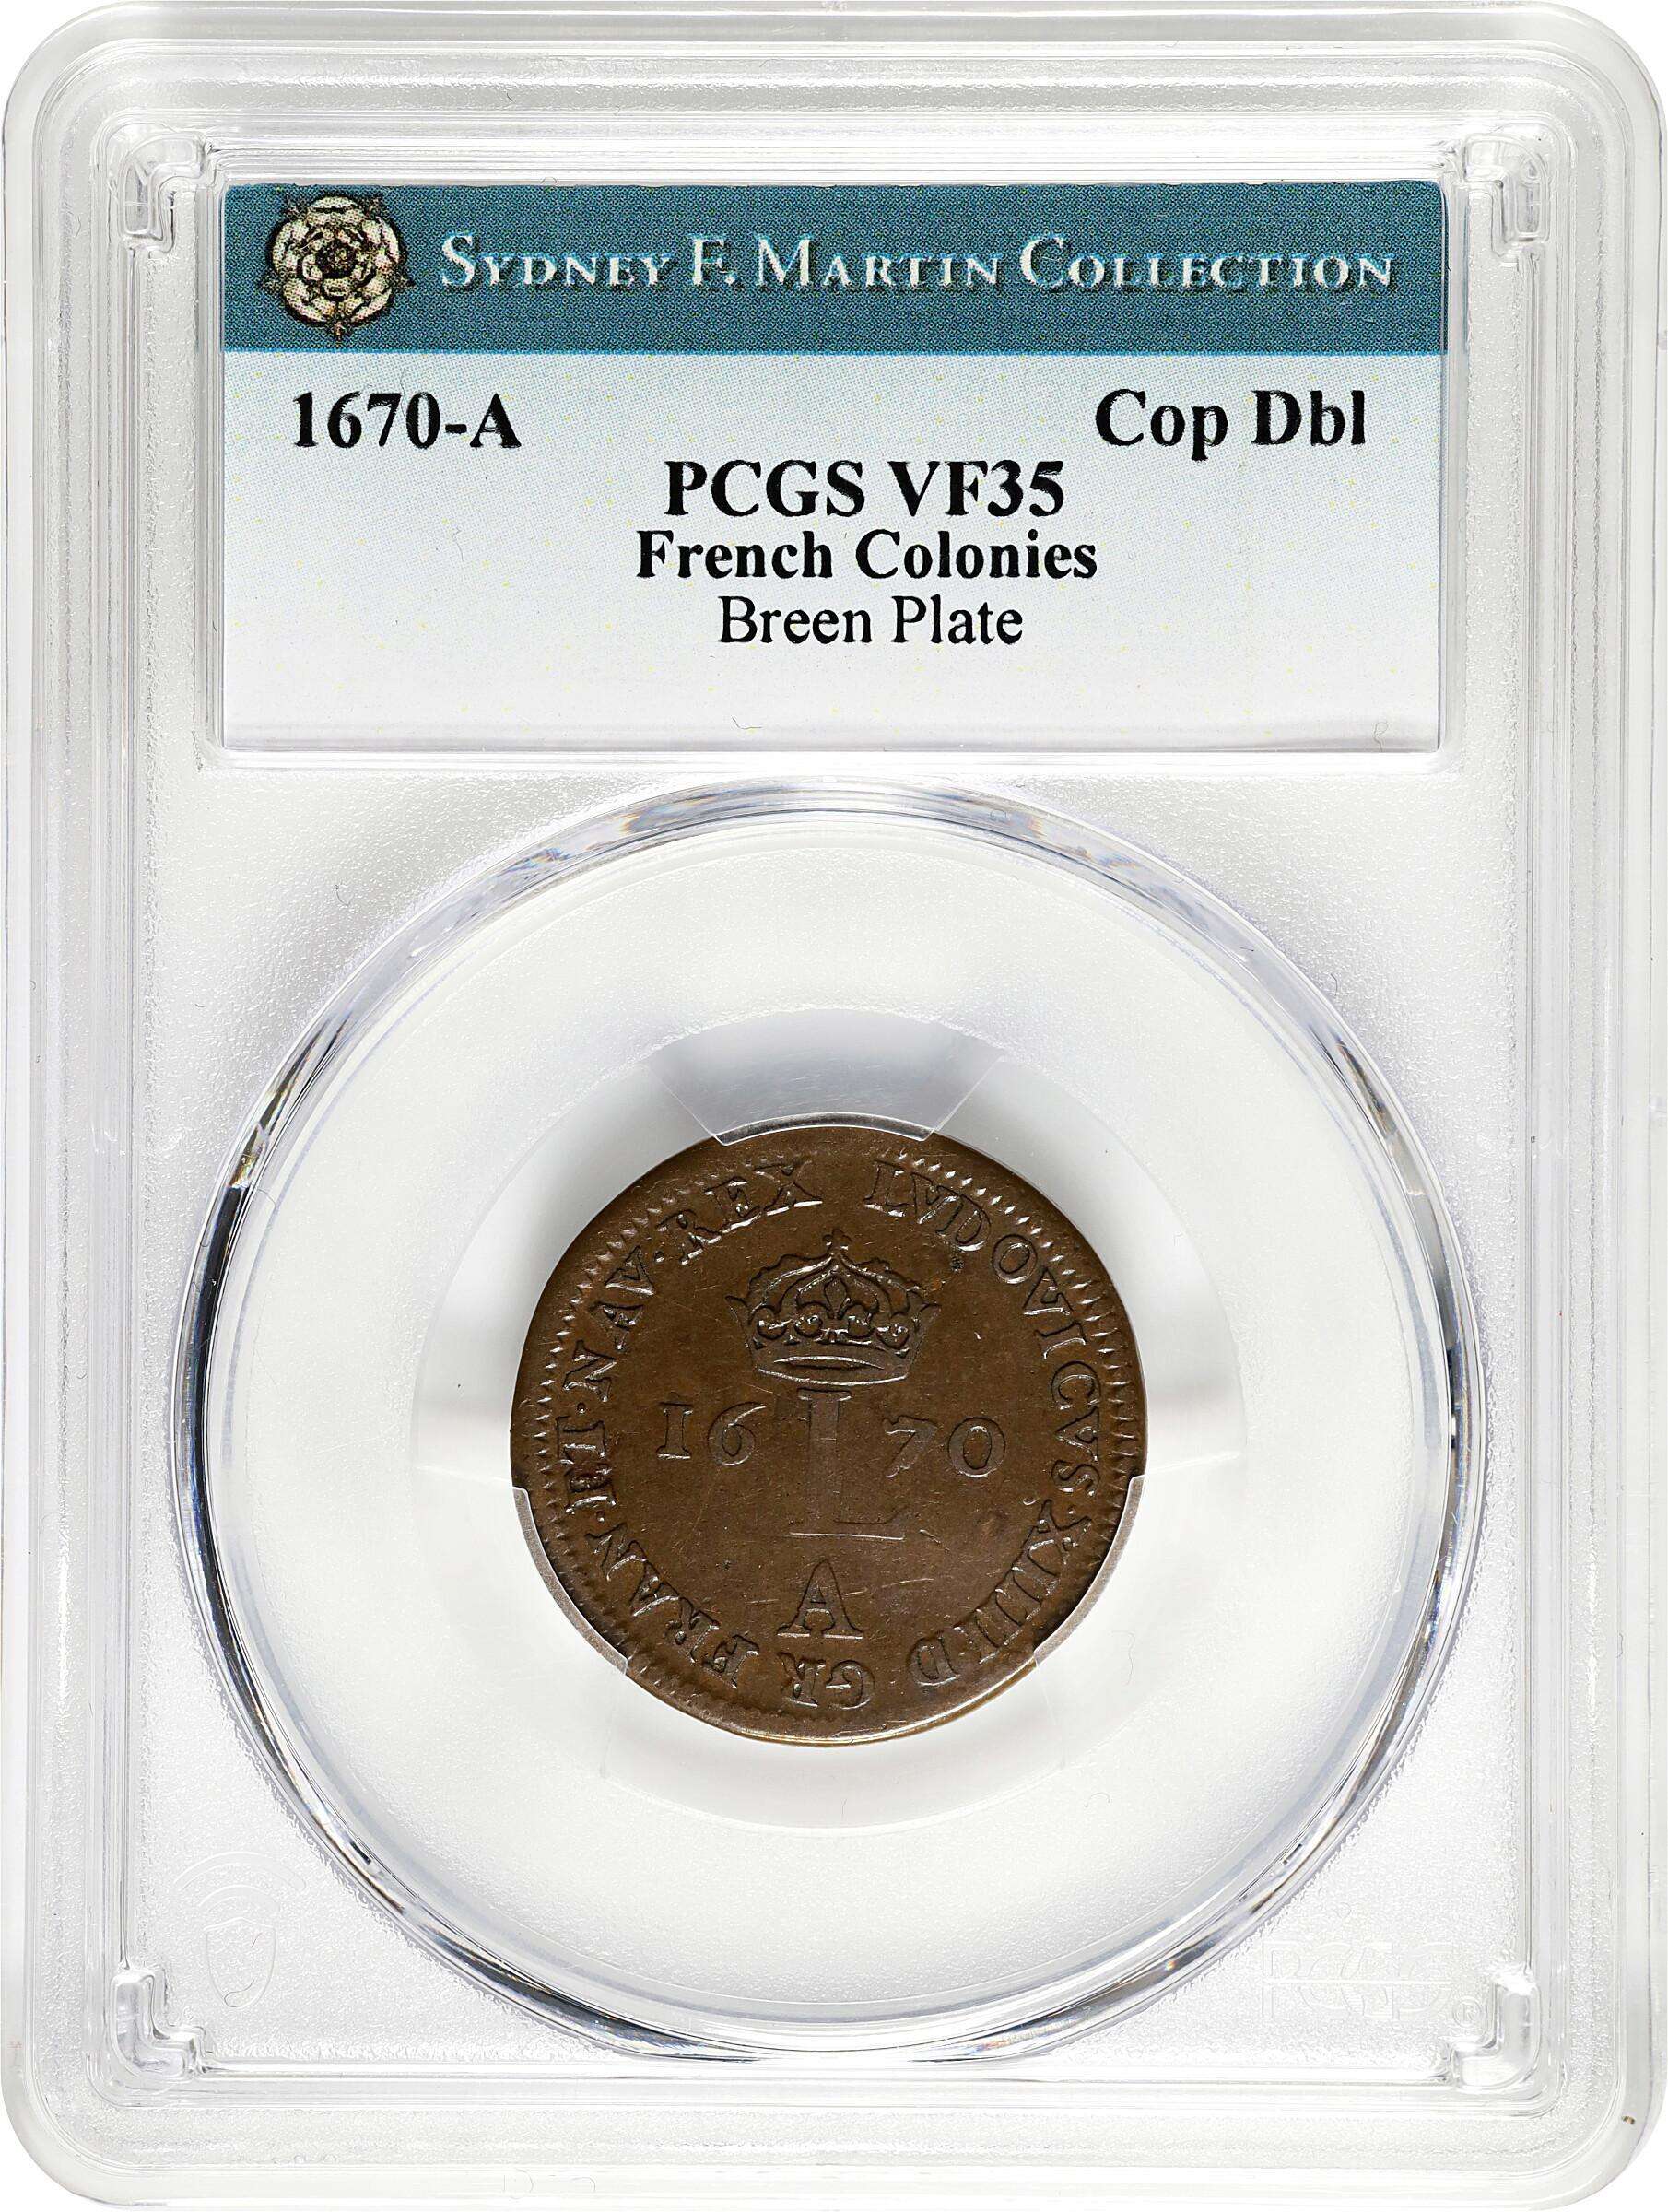 U.S. Coins) Catalog - Stack's Bowers